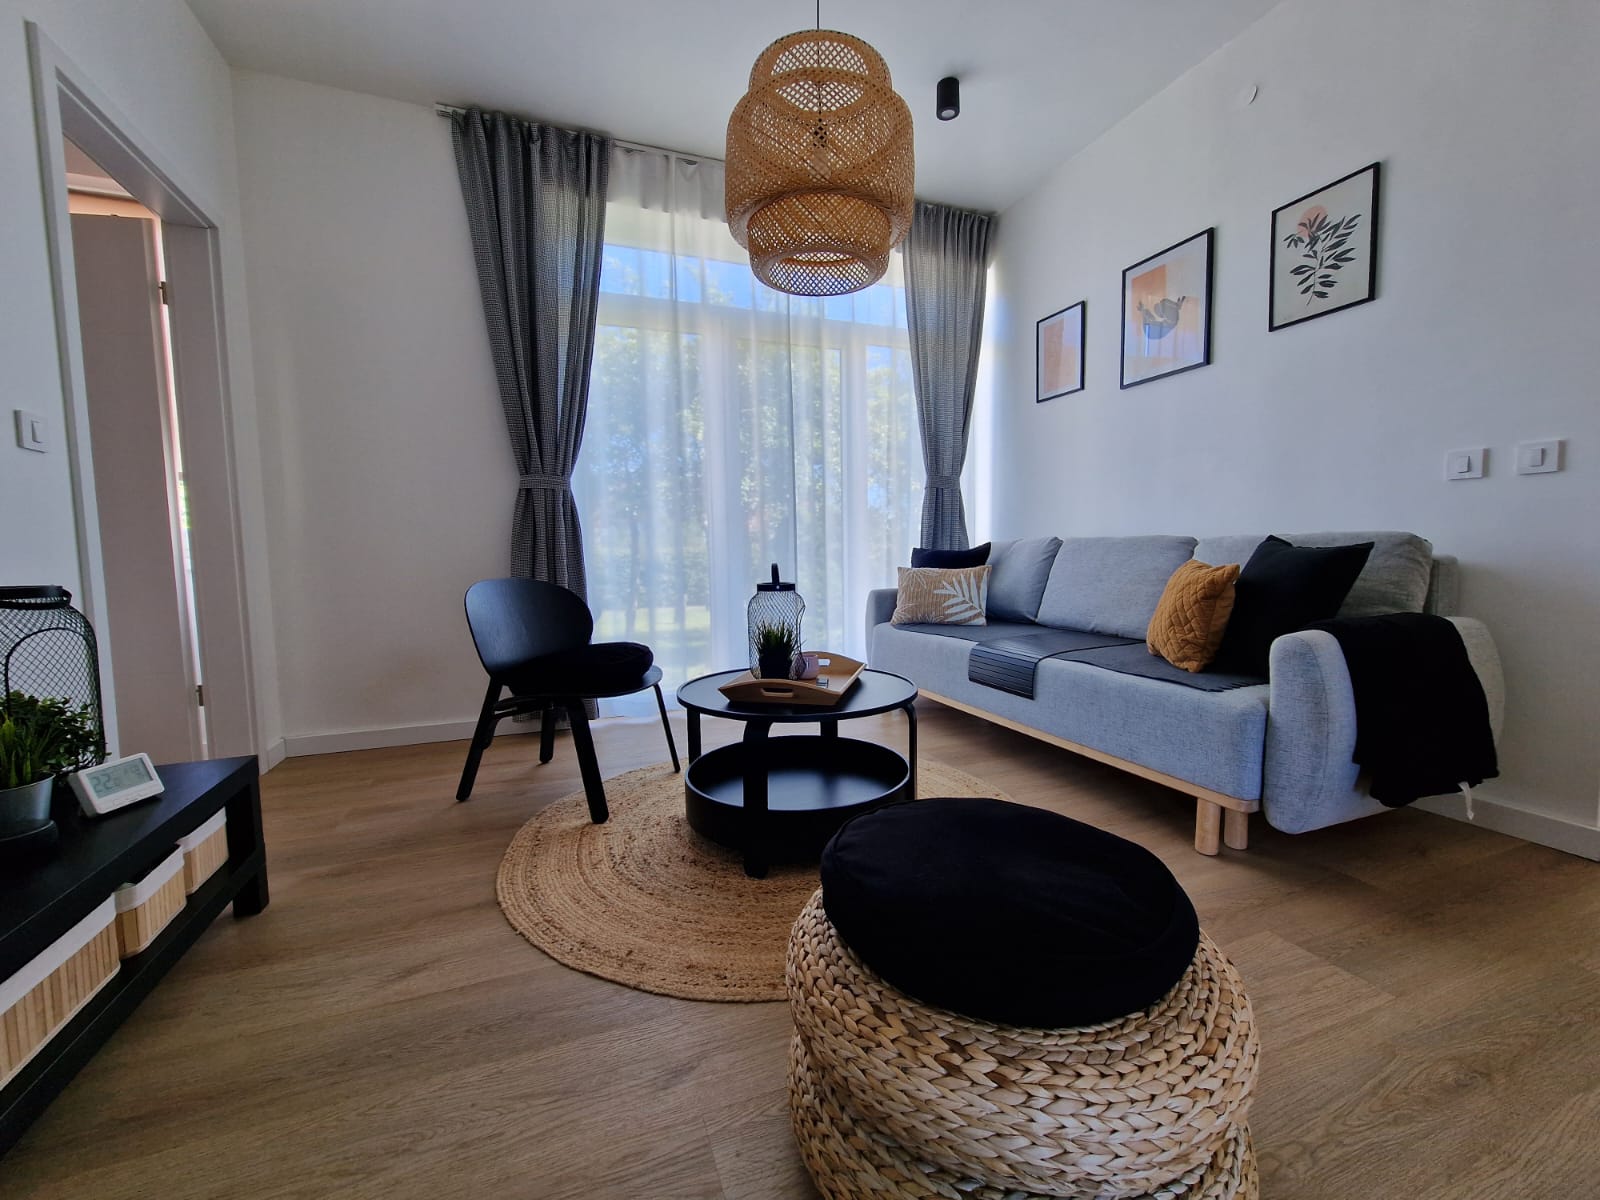 You are currently viewing Apartman “A’la II” ****